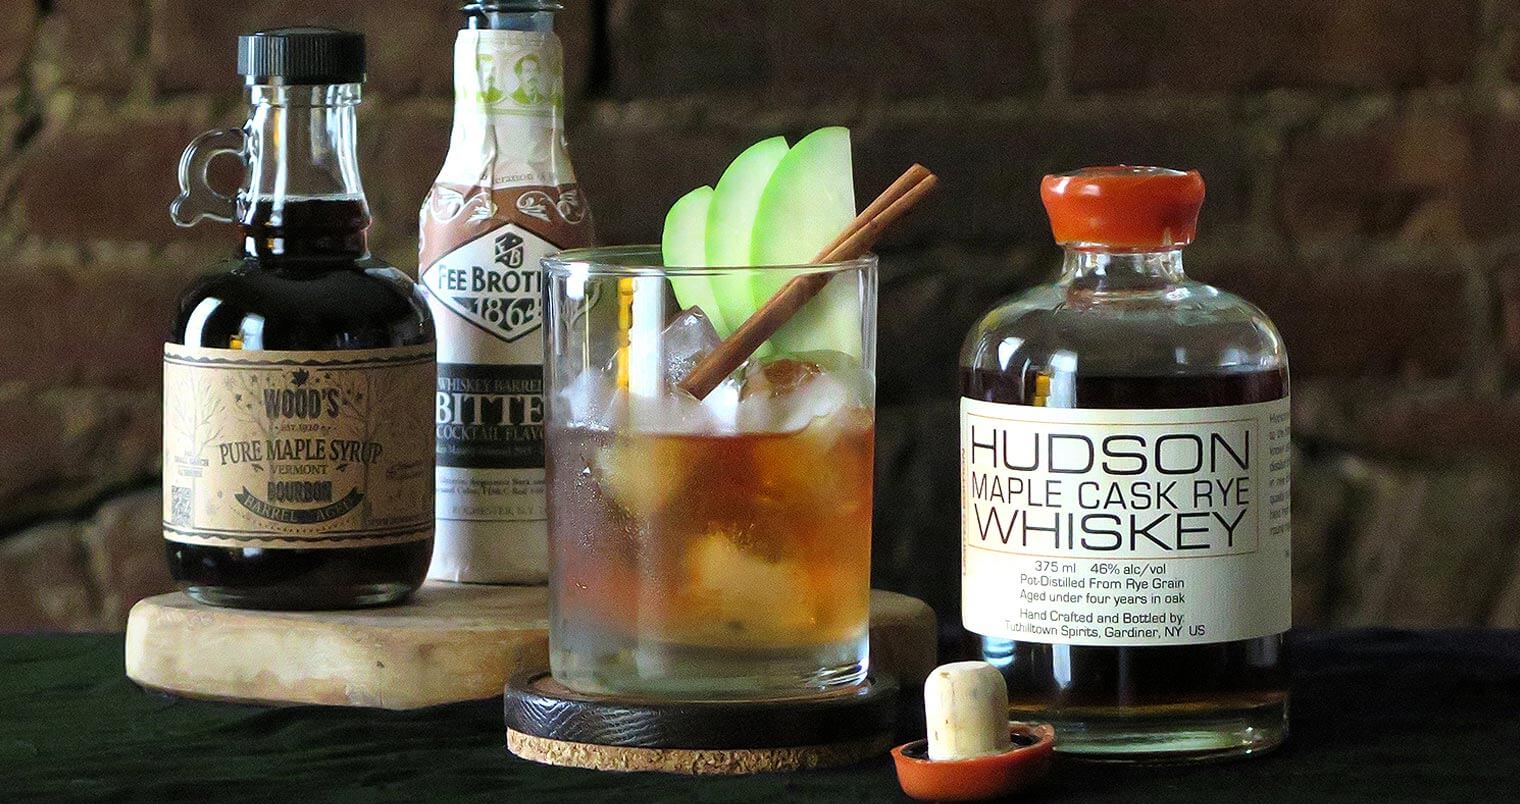 Hudson Whiskey Maple Cask Rye Cocktails, featured image